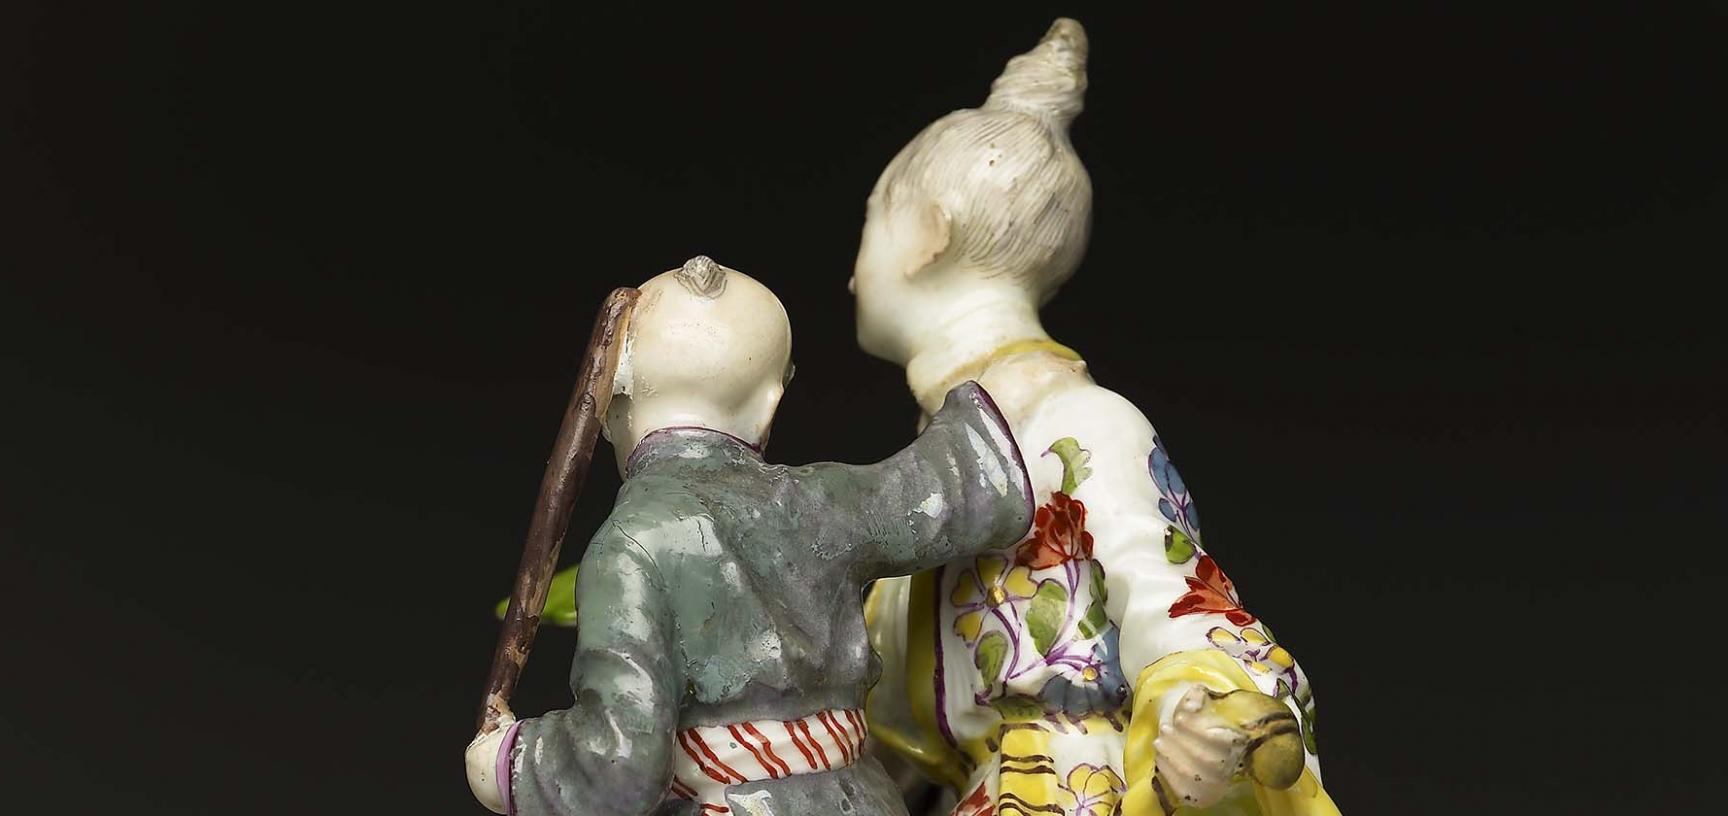 Chinoiserie group, Meissen, Germany, c. 1750